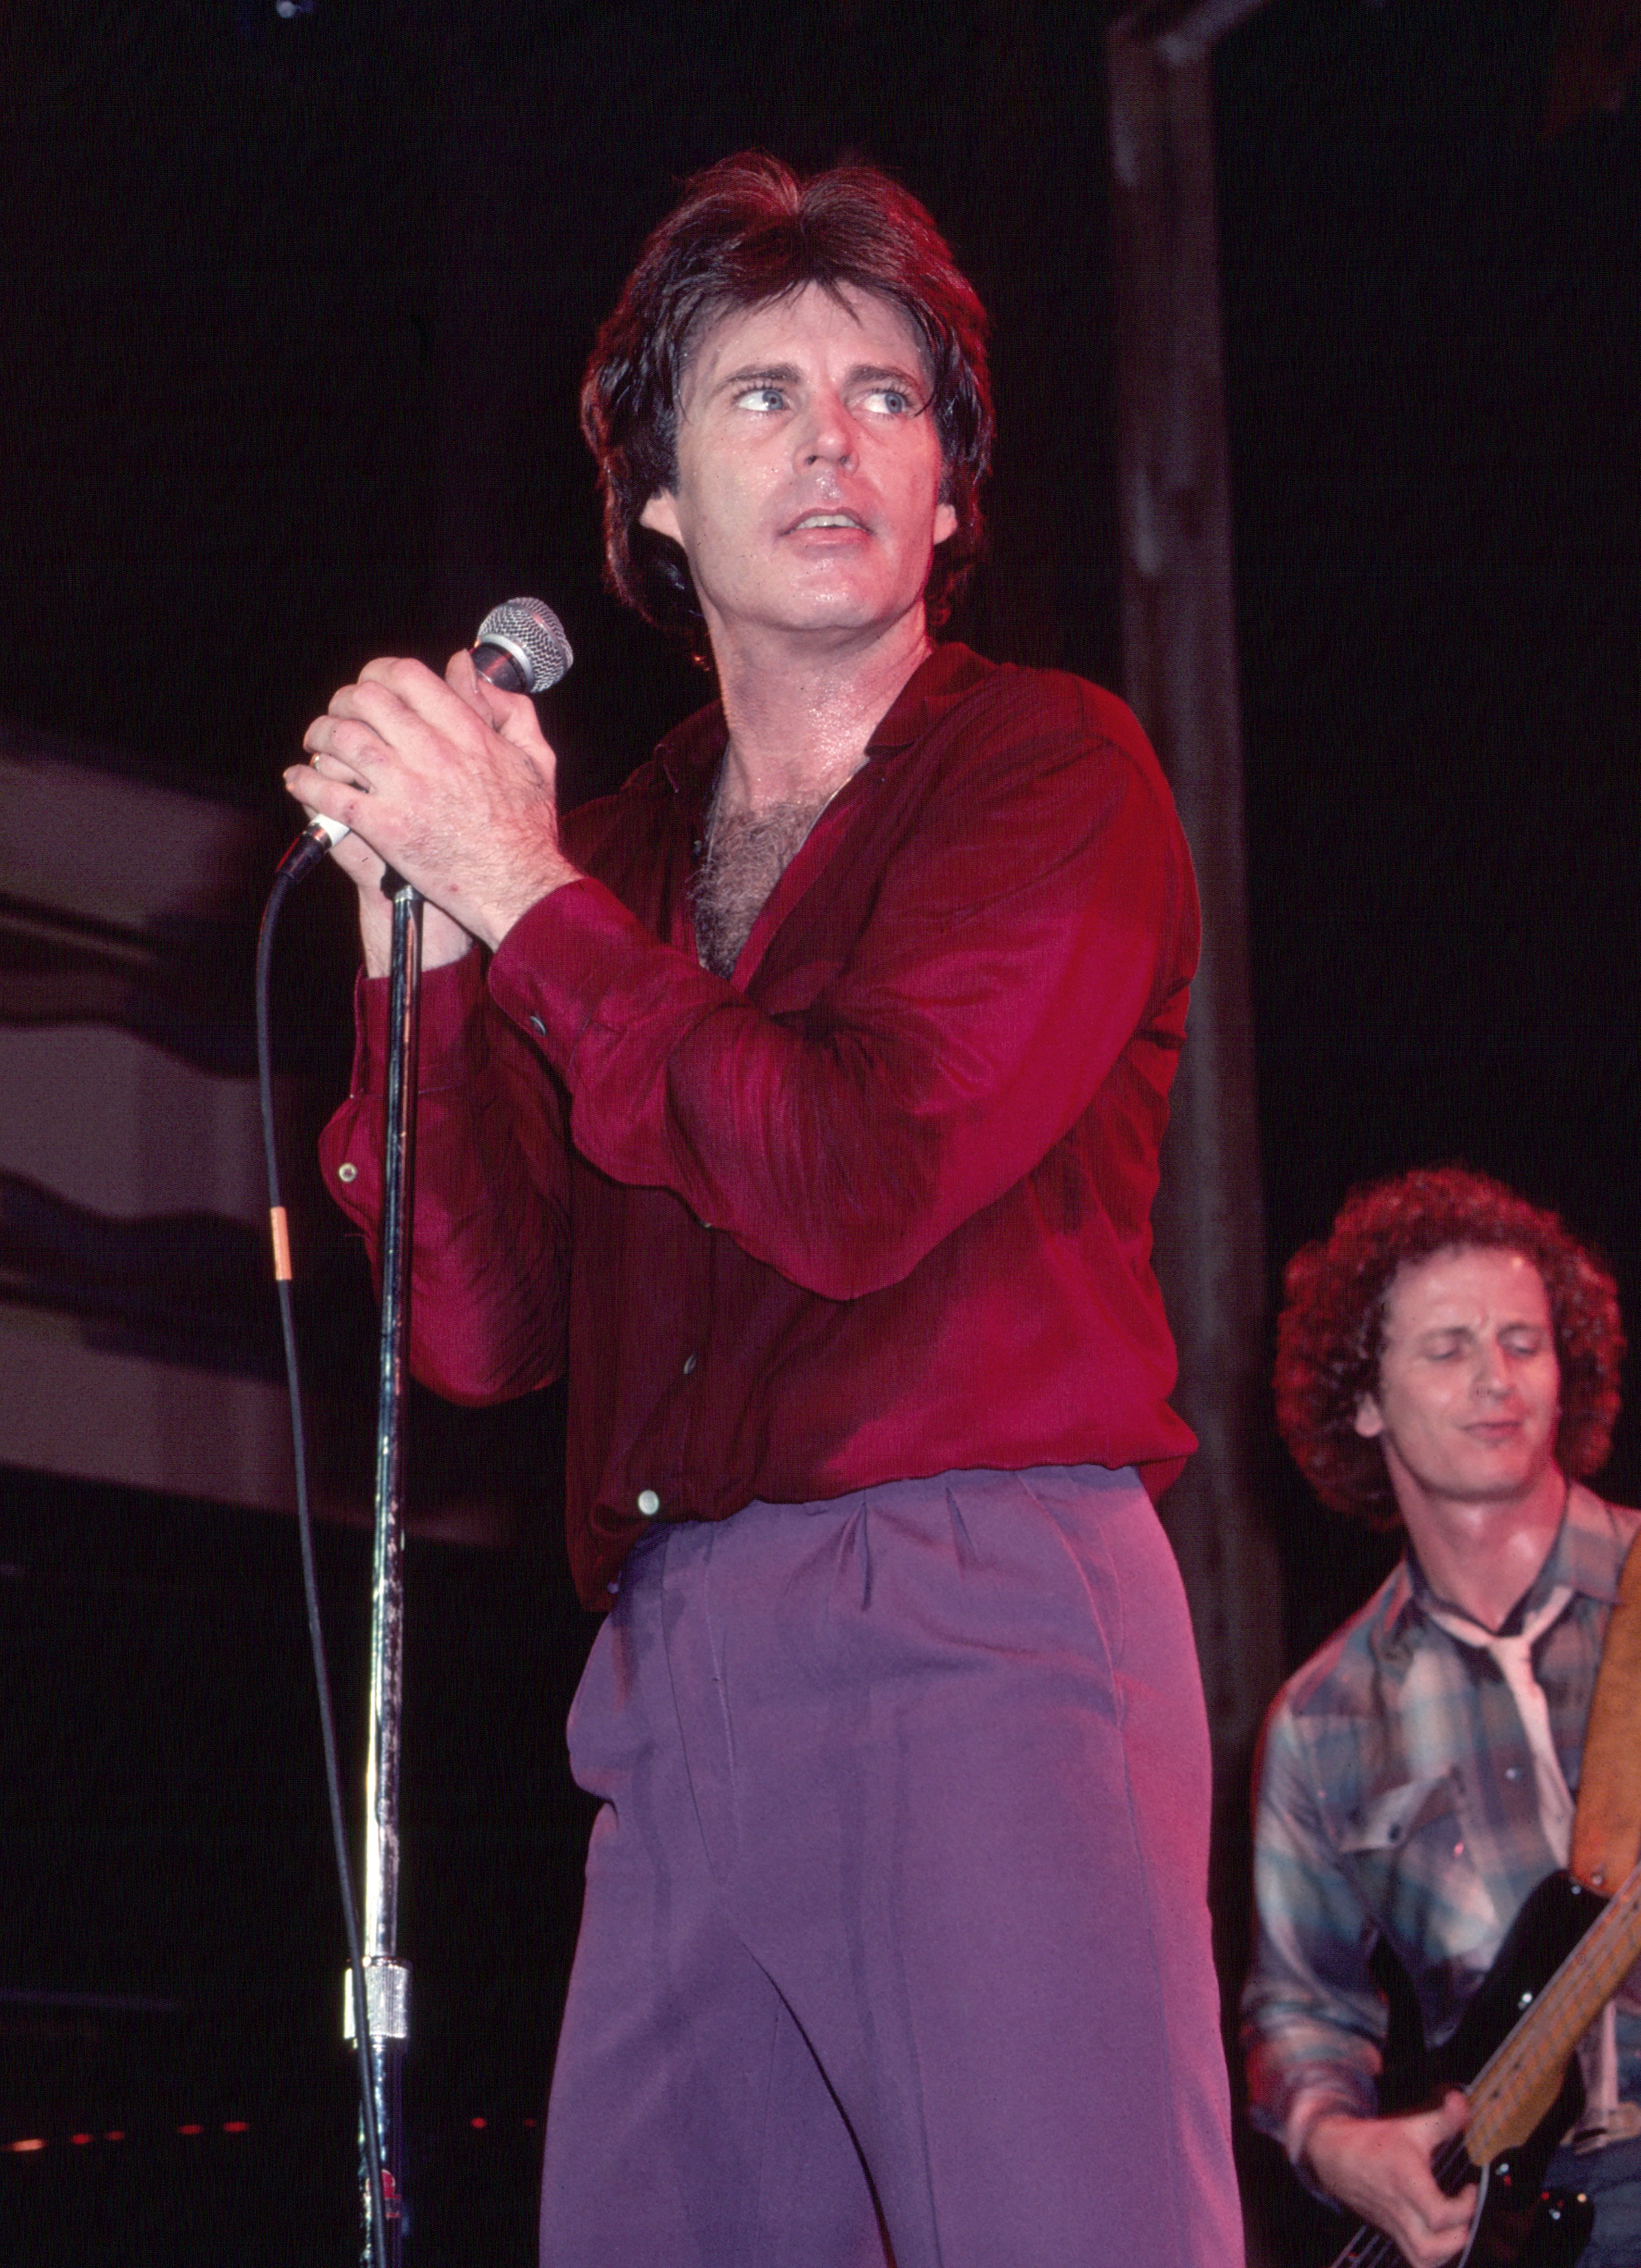 Ricky Nelsonperforms onstage at the Ritz, New York, on February 24, 1981 | Source: Getty Images